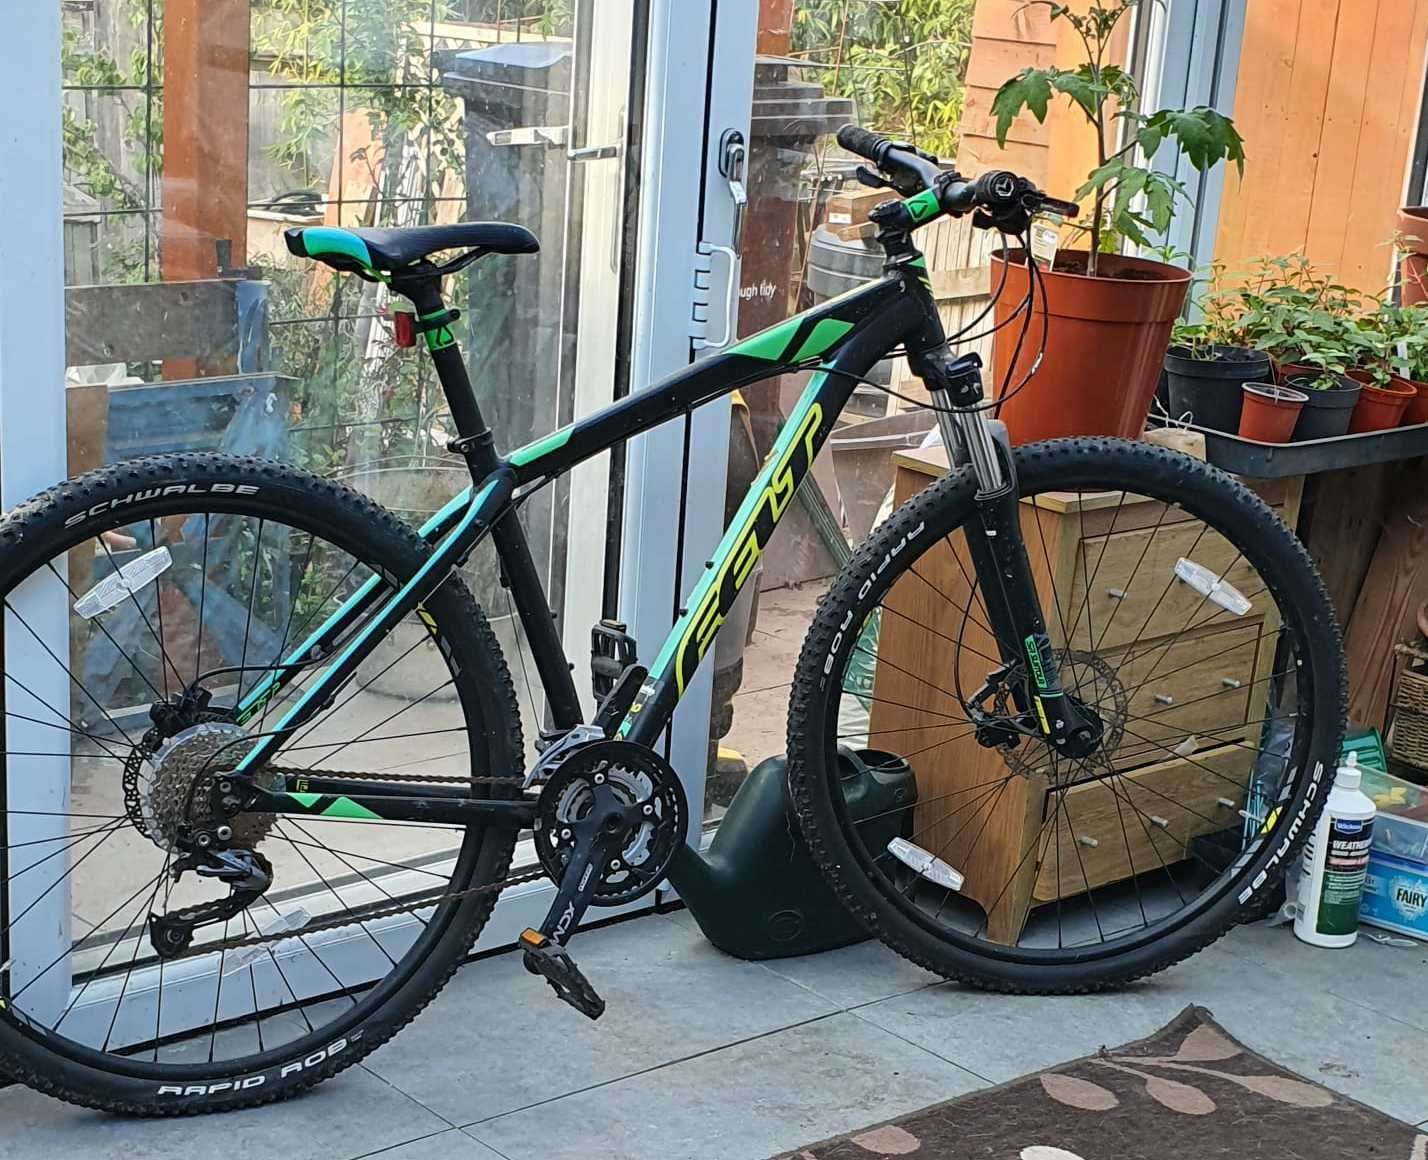 Inna's first bike was stolen from Maidstone West Station bike rack between 5.30pm on Thursday, February 16, and 6.30am the next day